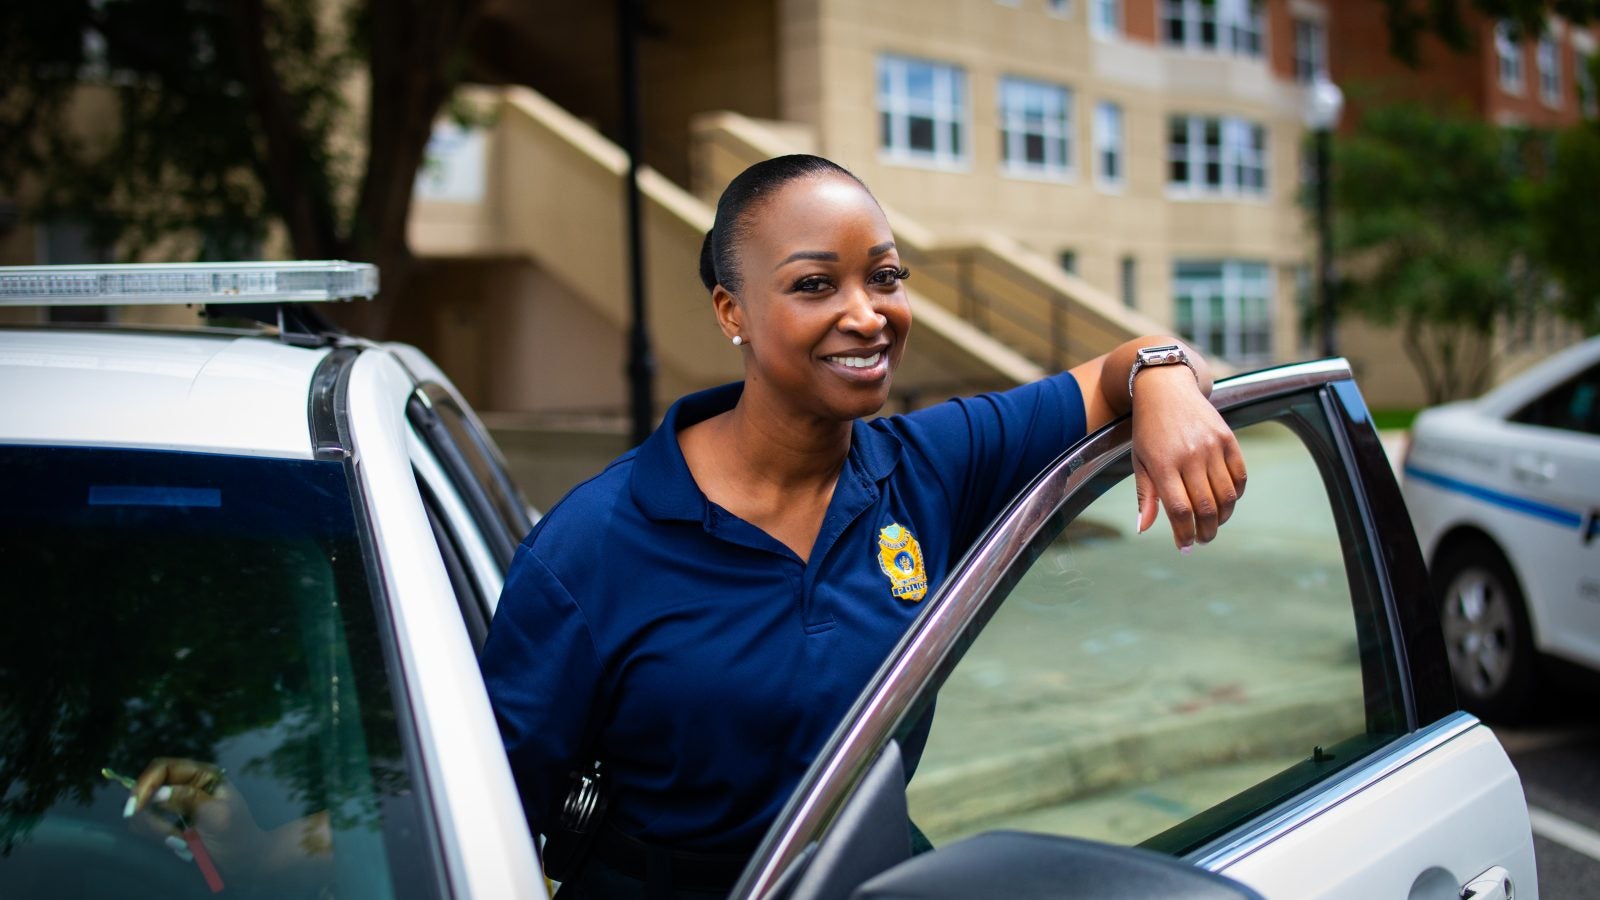 A Black female police officer leans over the door of her police car and smiles.